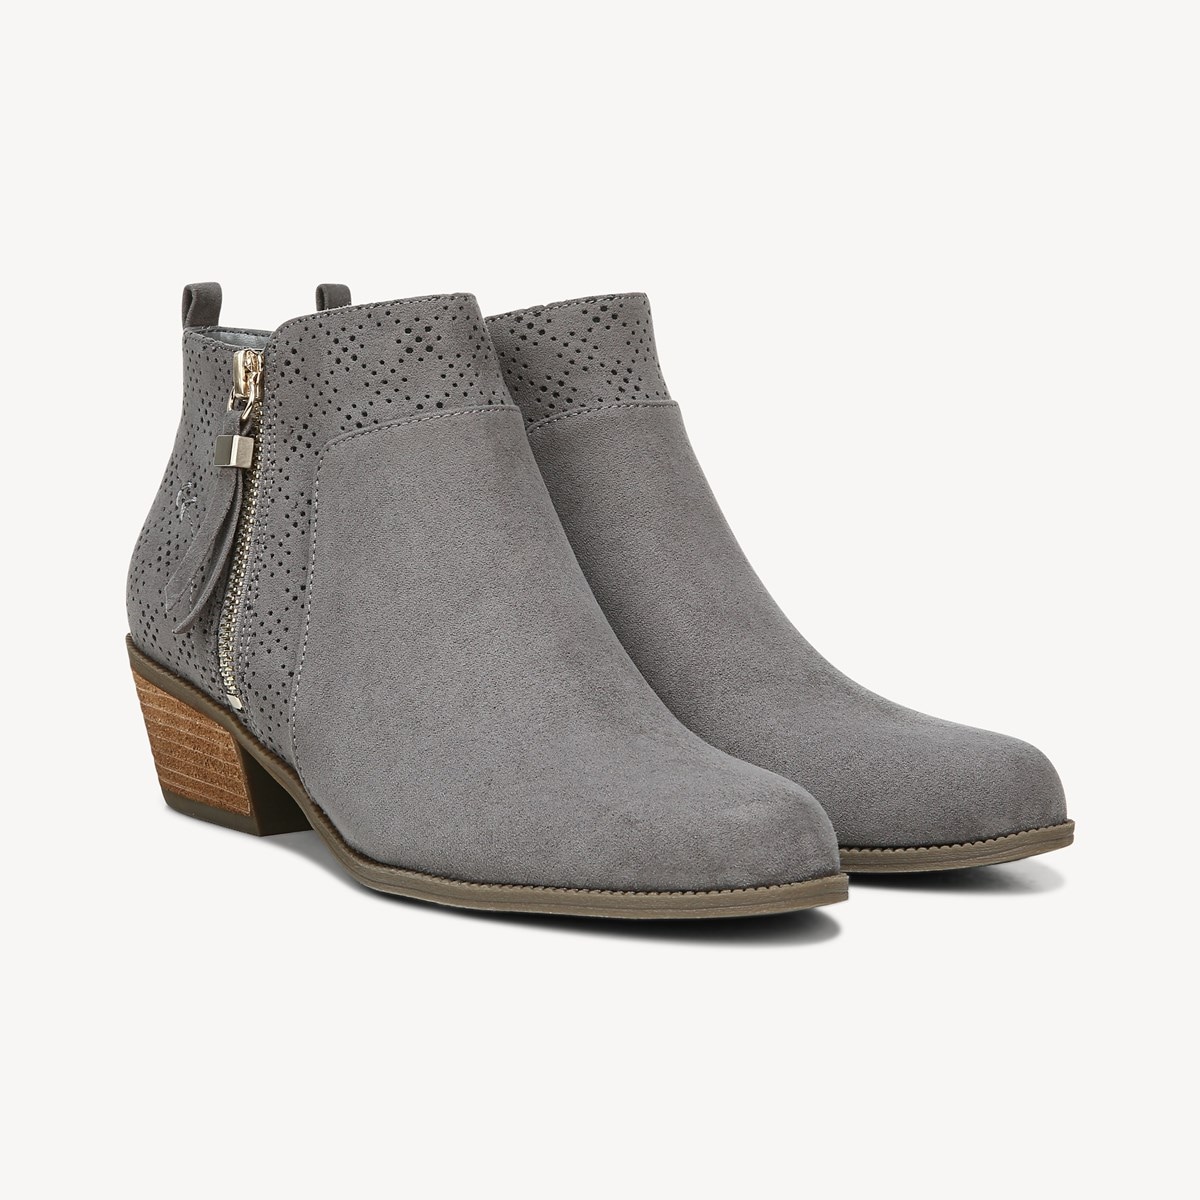 American Lifestyle Brianna Bootie in 